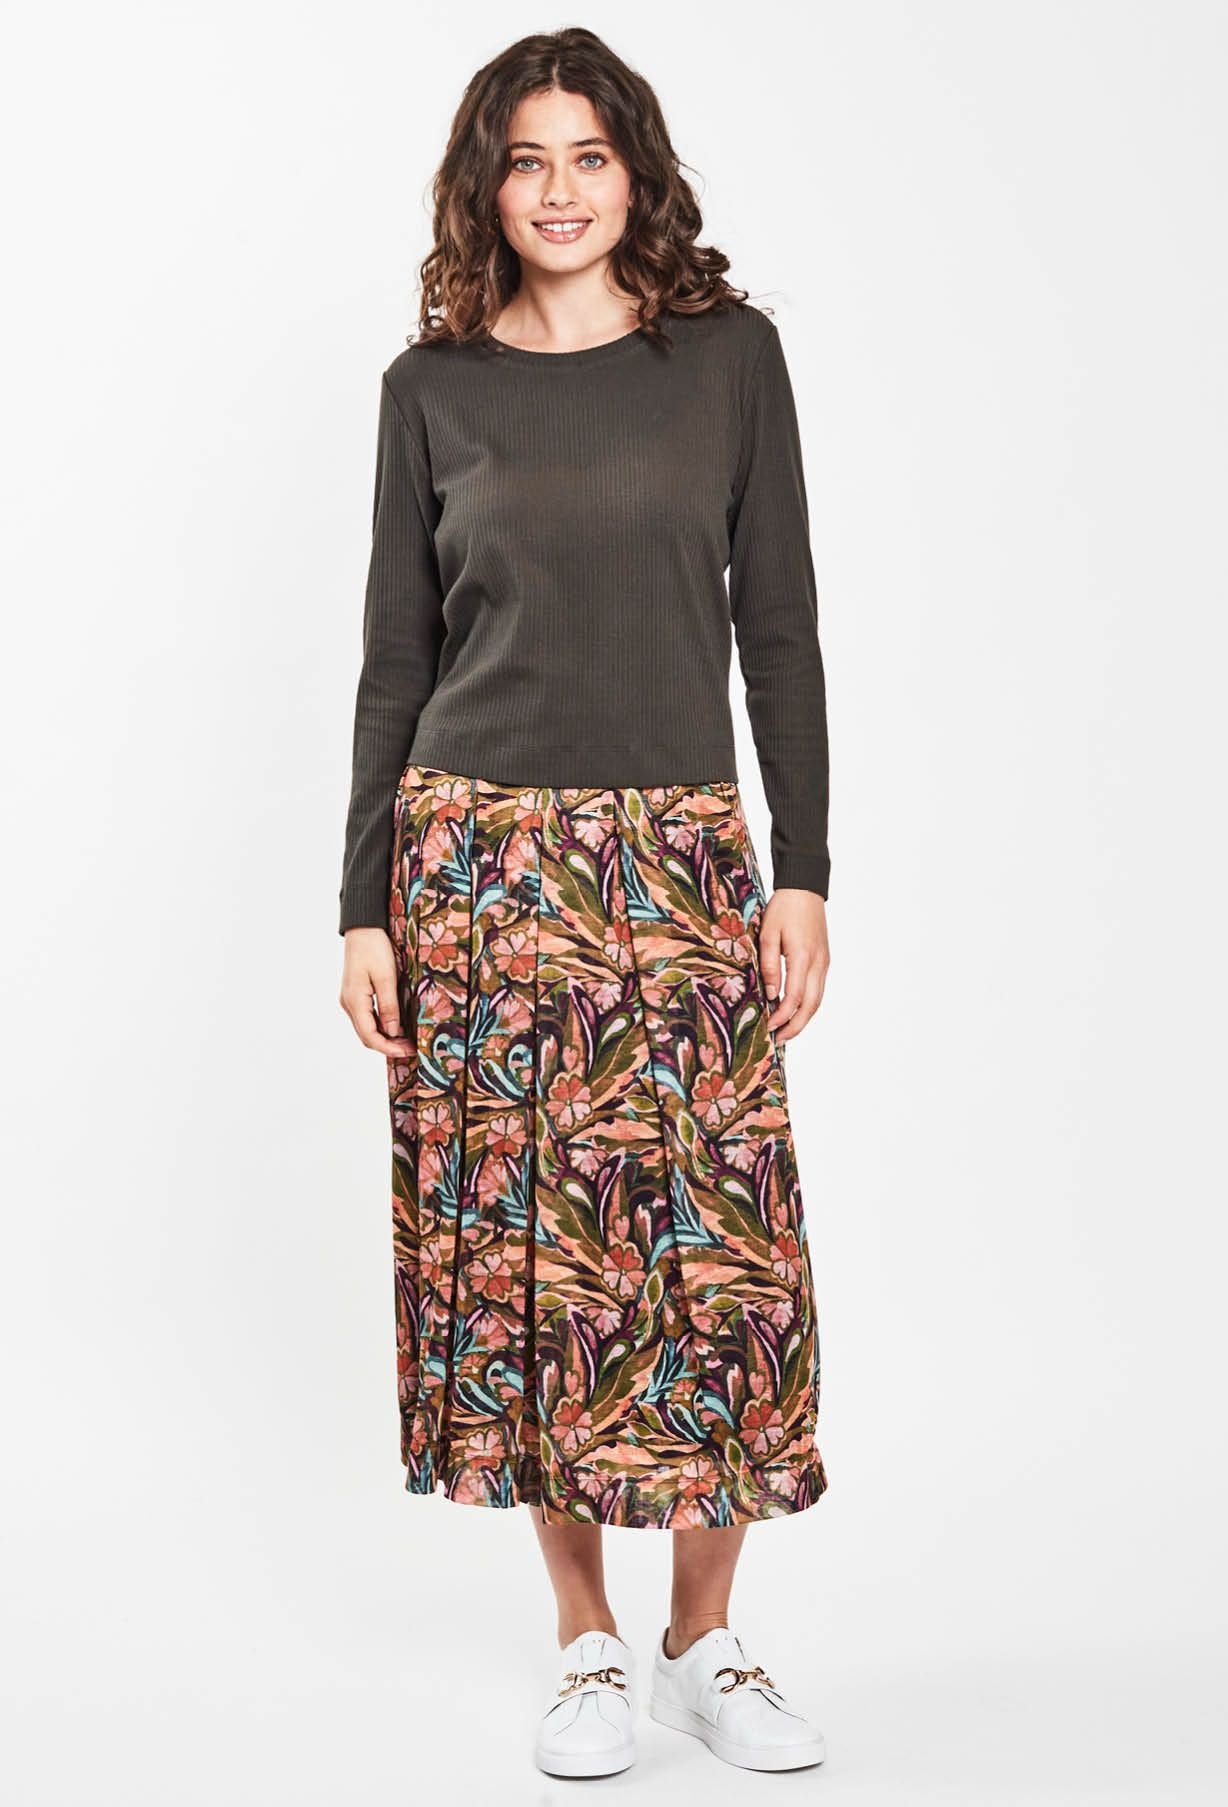 ANNE MARDELL KENDALL SKIRT - FLORENCE - THE VOGUE STORE